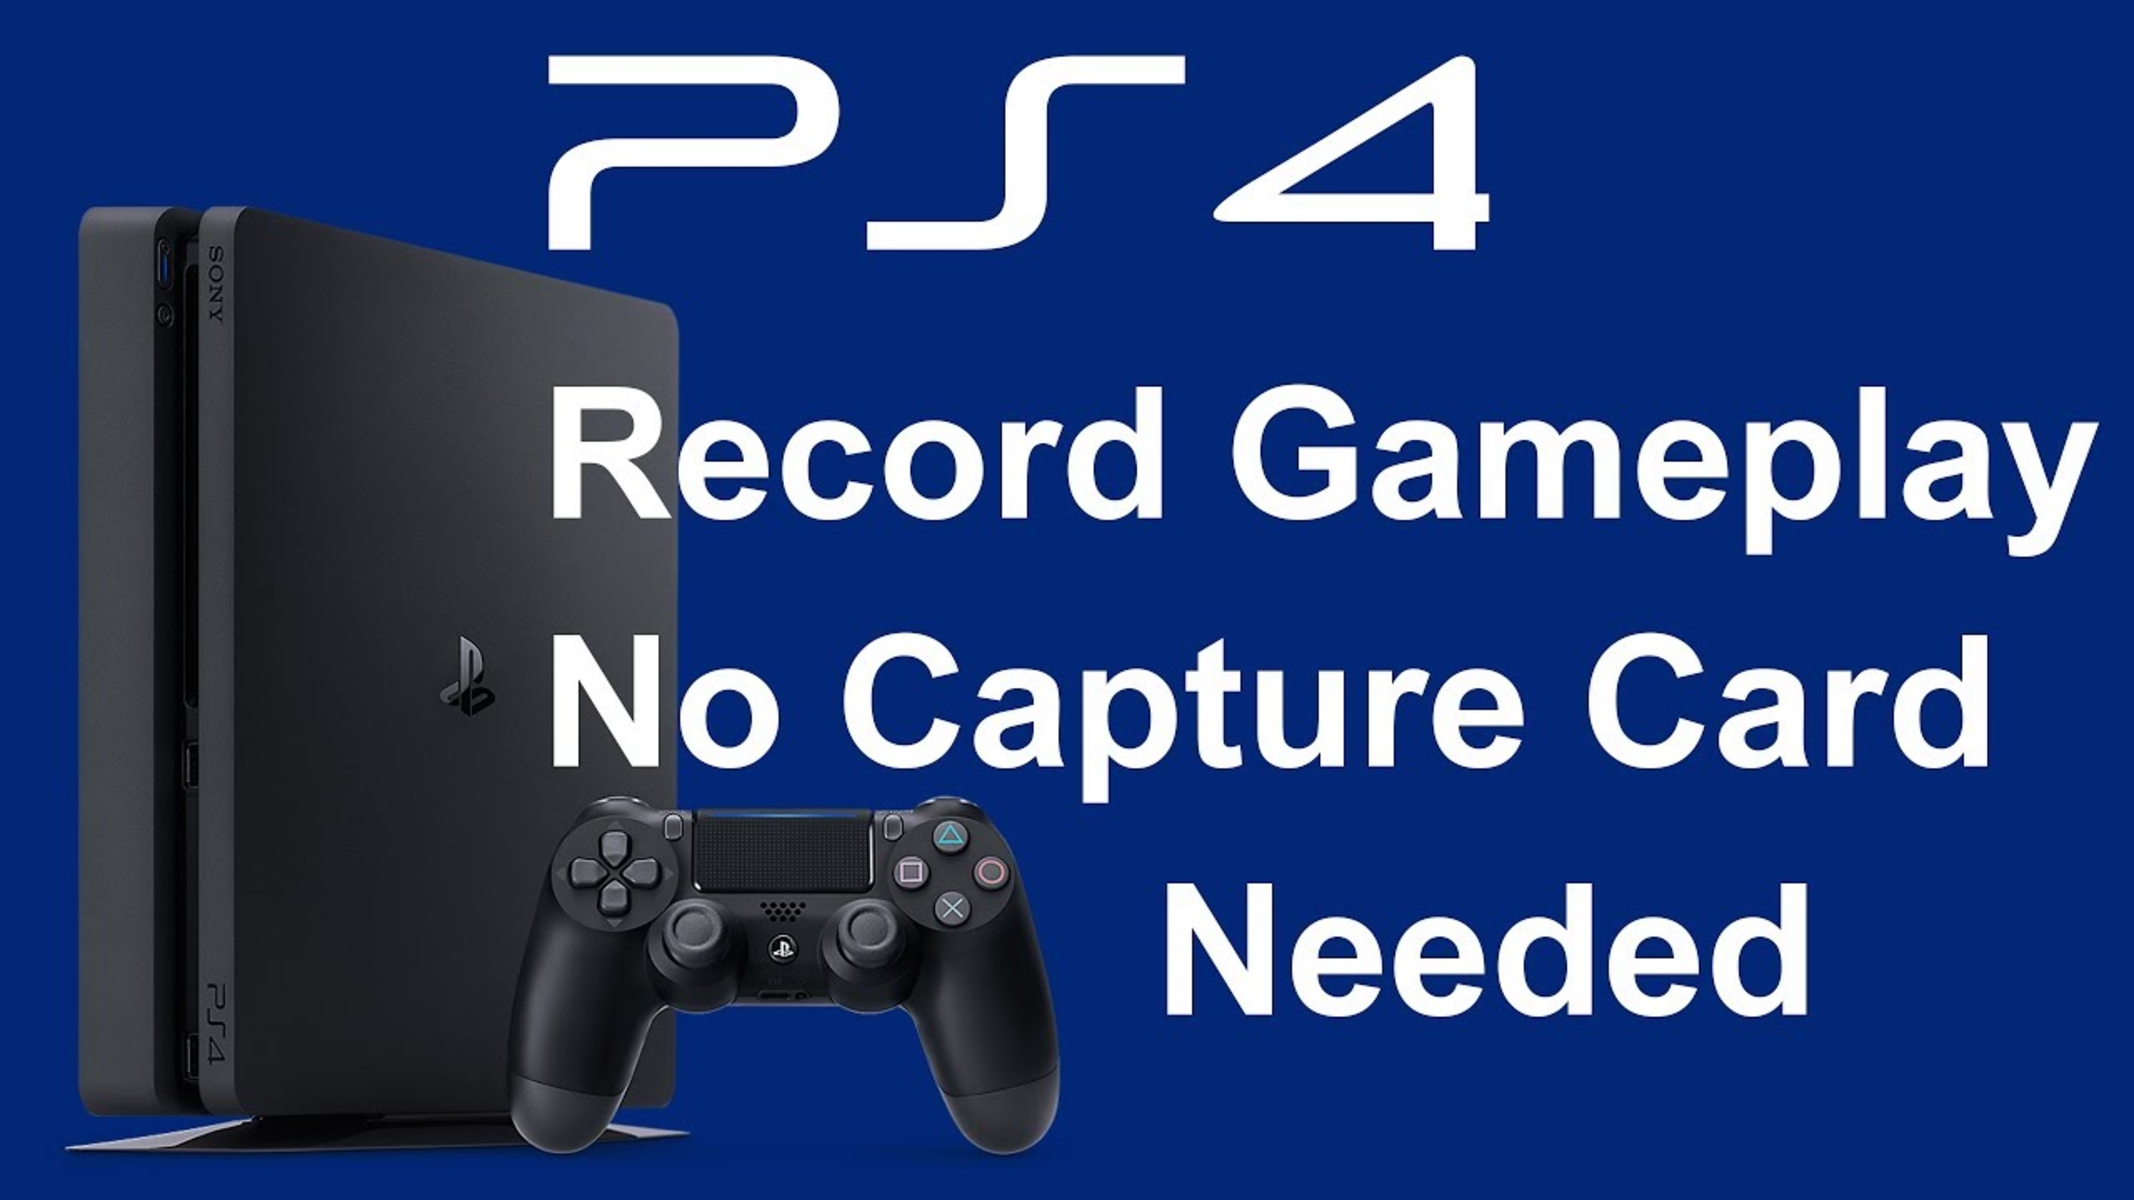 How To Record PS4 Gameplay Without Capture Card